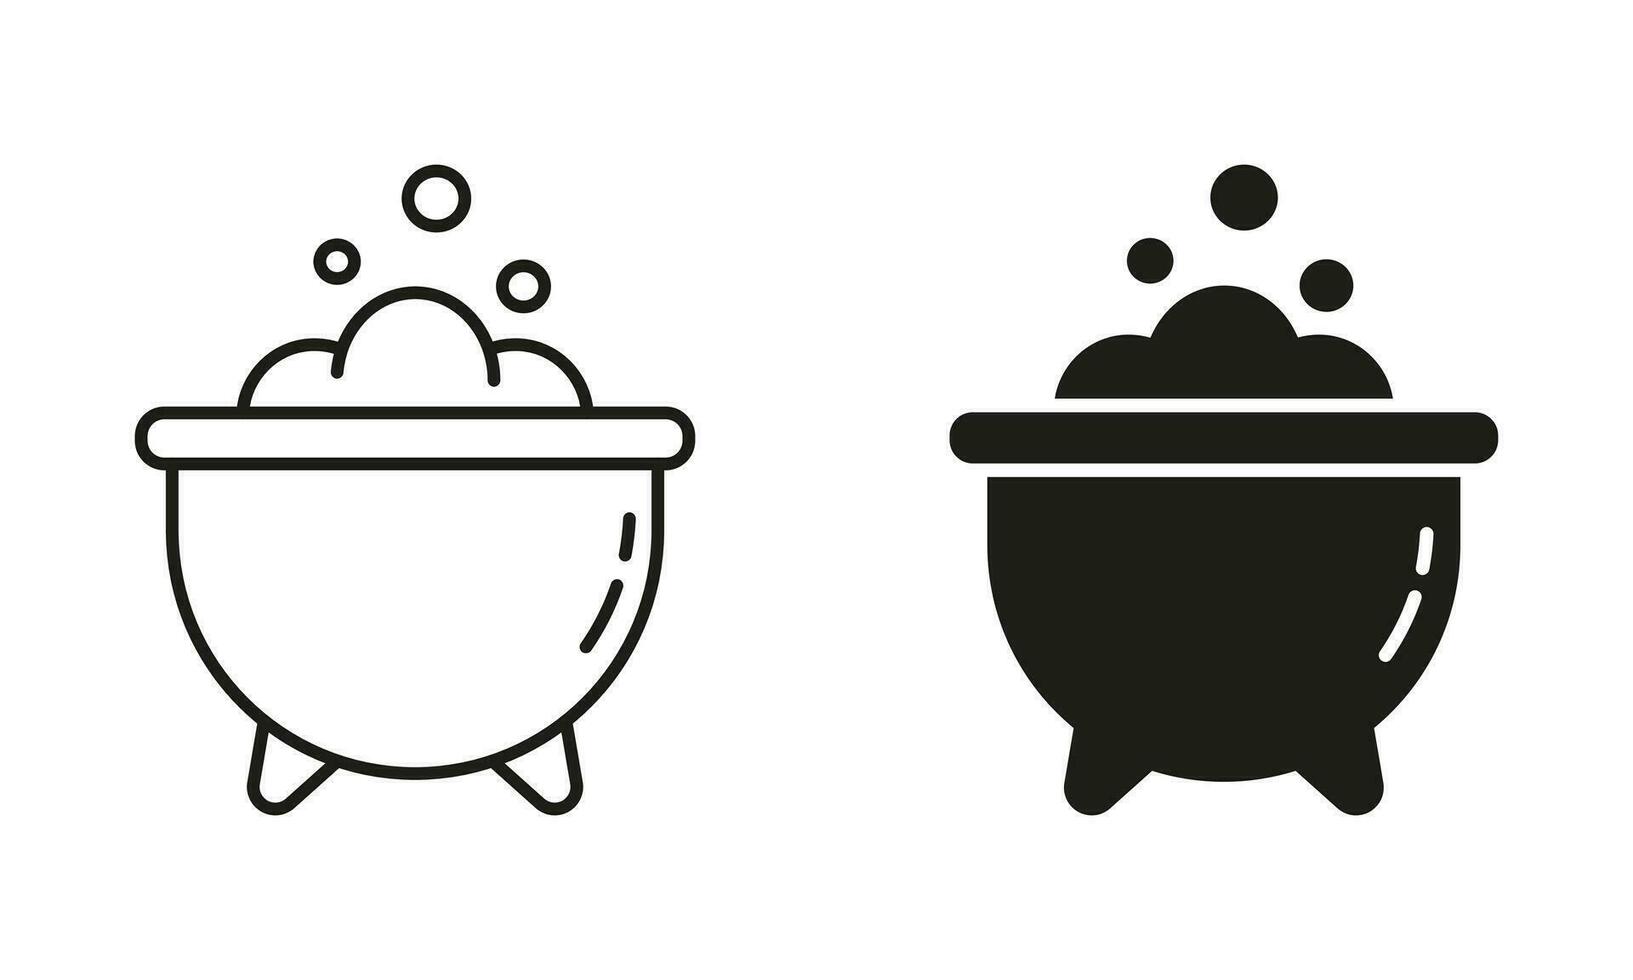 Halloween Decoration, Cauldron with Bubbling Potion Line and Silhouette Black Icon Set. Witches Cauldron Pictogram. Magicians Pot with Brew Symbol Collection. Isolated Vector Illustration.